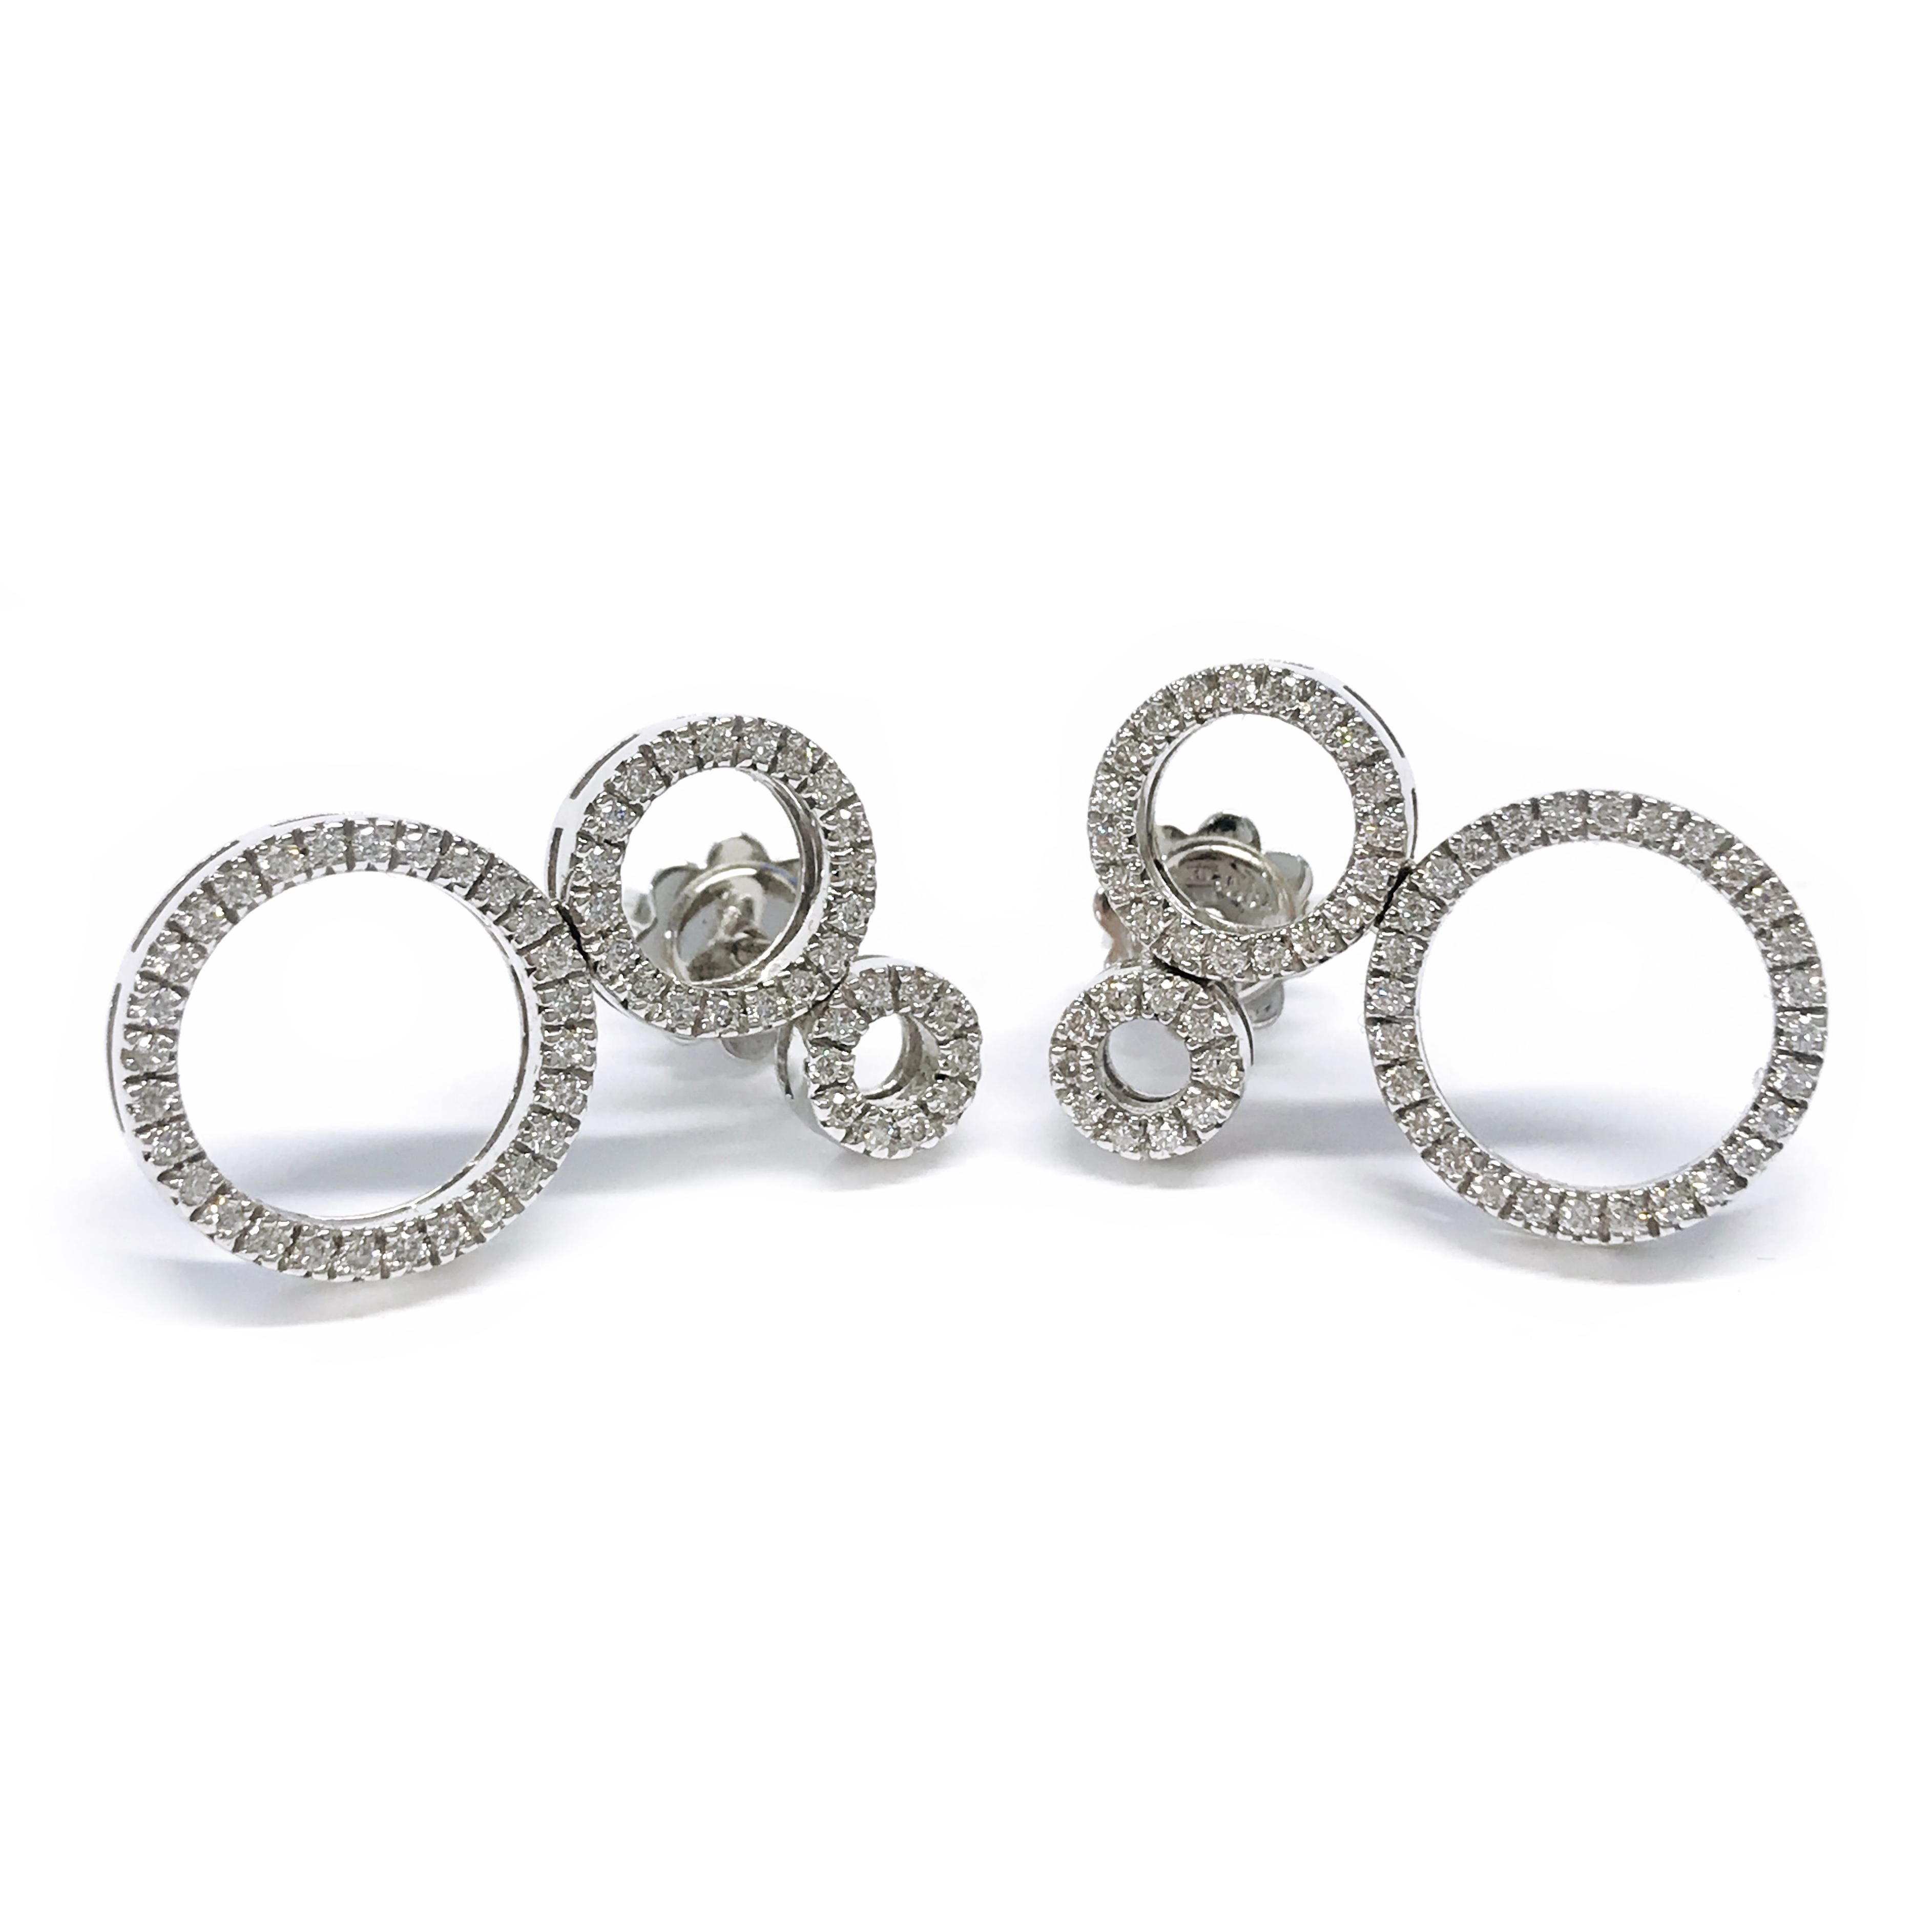 18 Karat White Gold Diamond Multi-Circle Earrings. These beautiful and whimsical earrings consist of pave-set diamonds in three different size circles, the earring backs are smooth. The diamonds are brilliant-cut with a total weight of 0.55ctw. Each